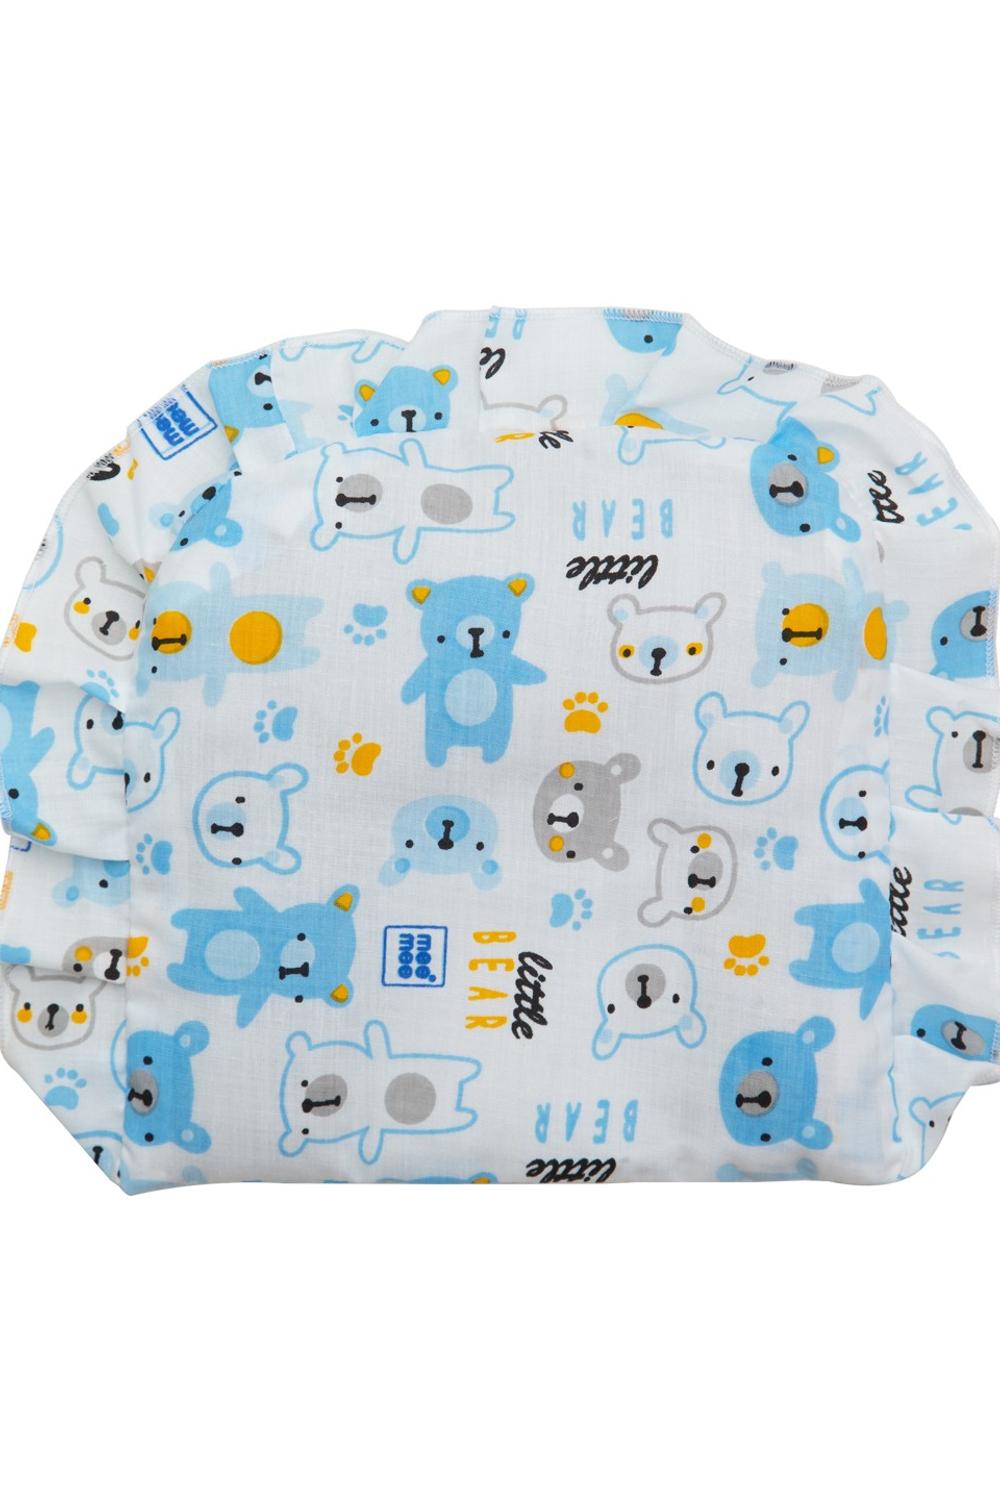 Mee Mee Breathable Baby Pillow with Mustard Seeds (Blue)